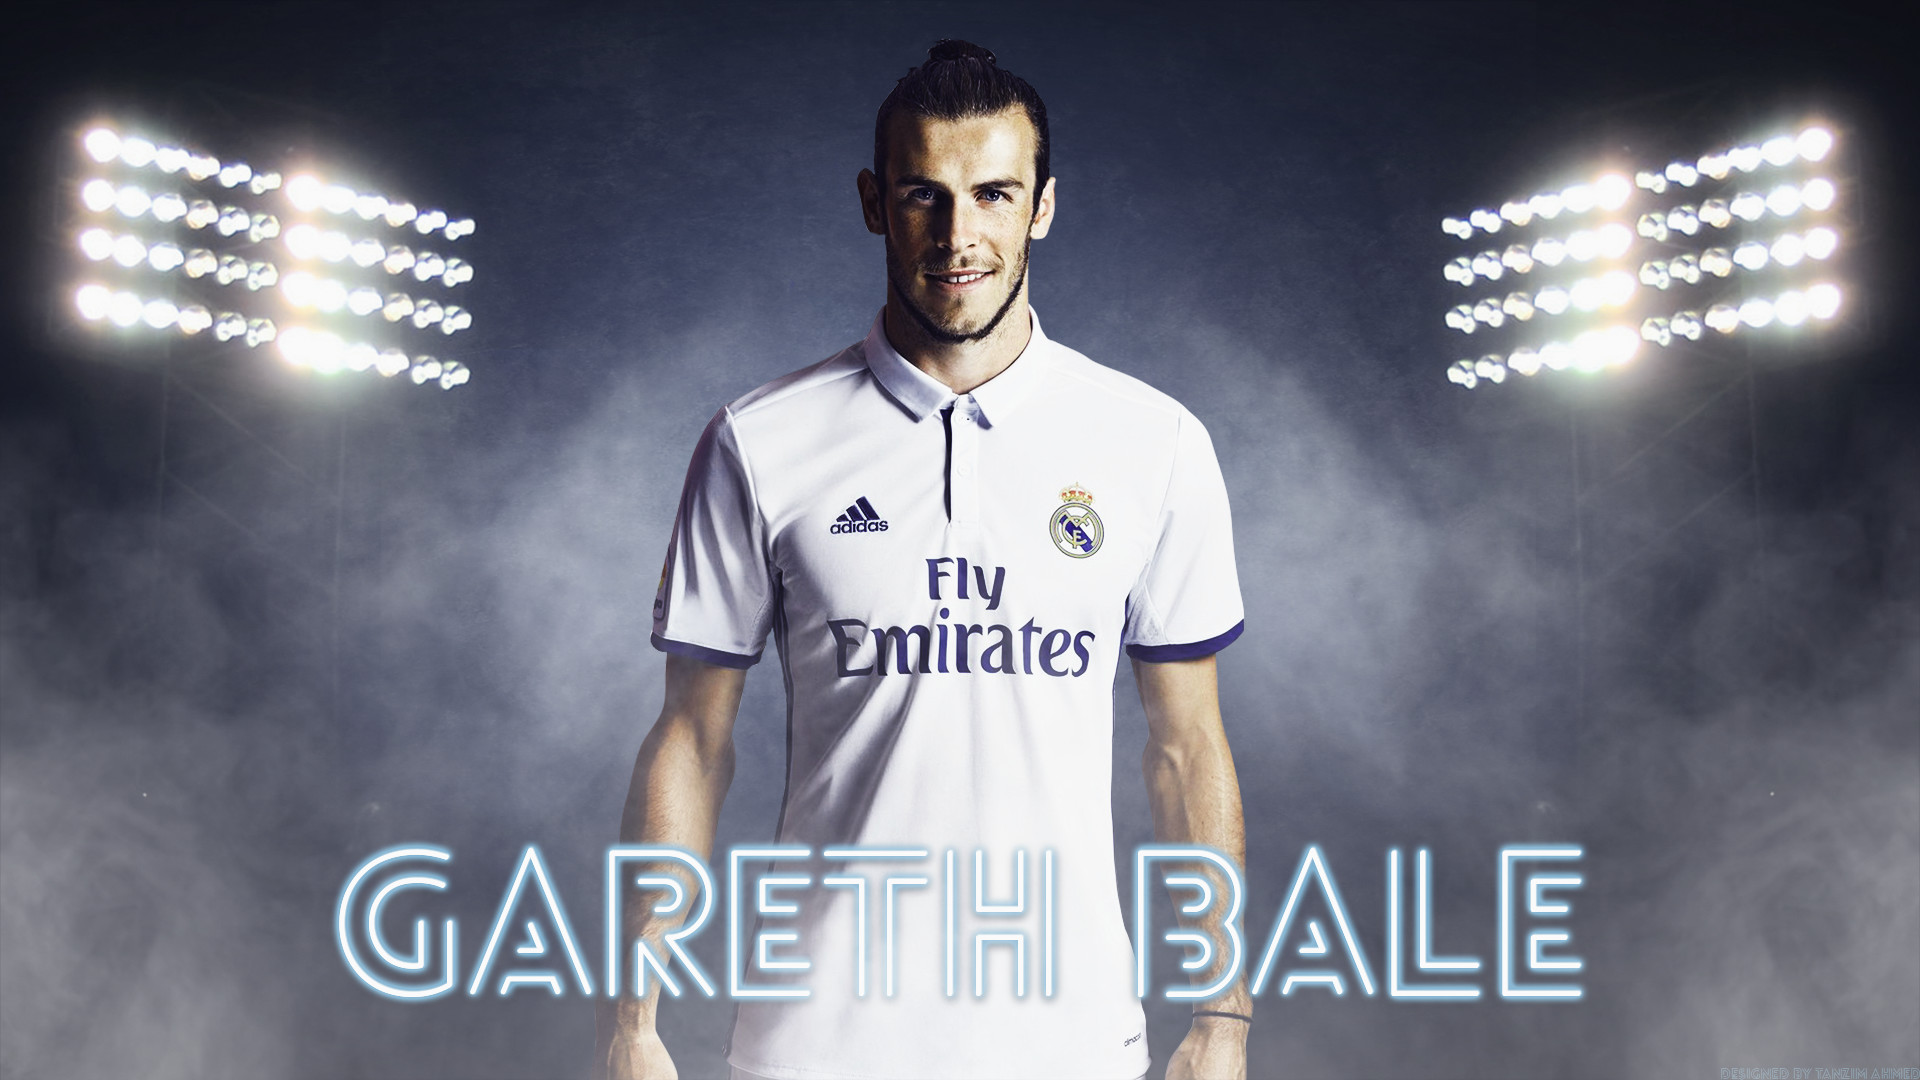 1920x1080 Gareth Bale Wallpapers Images Photos Pictures Backgrounds